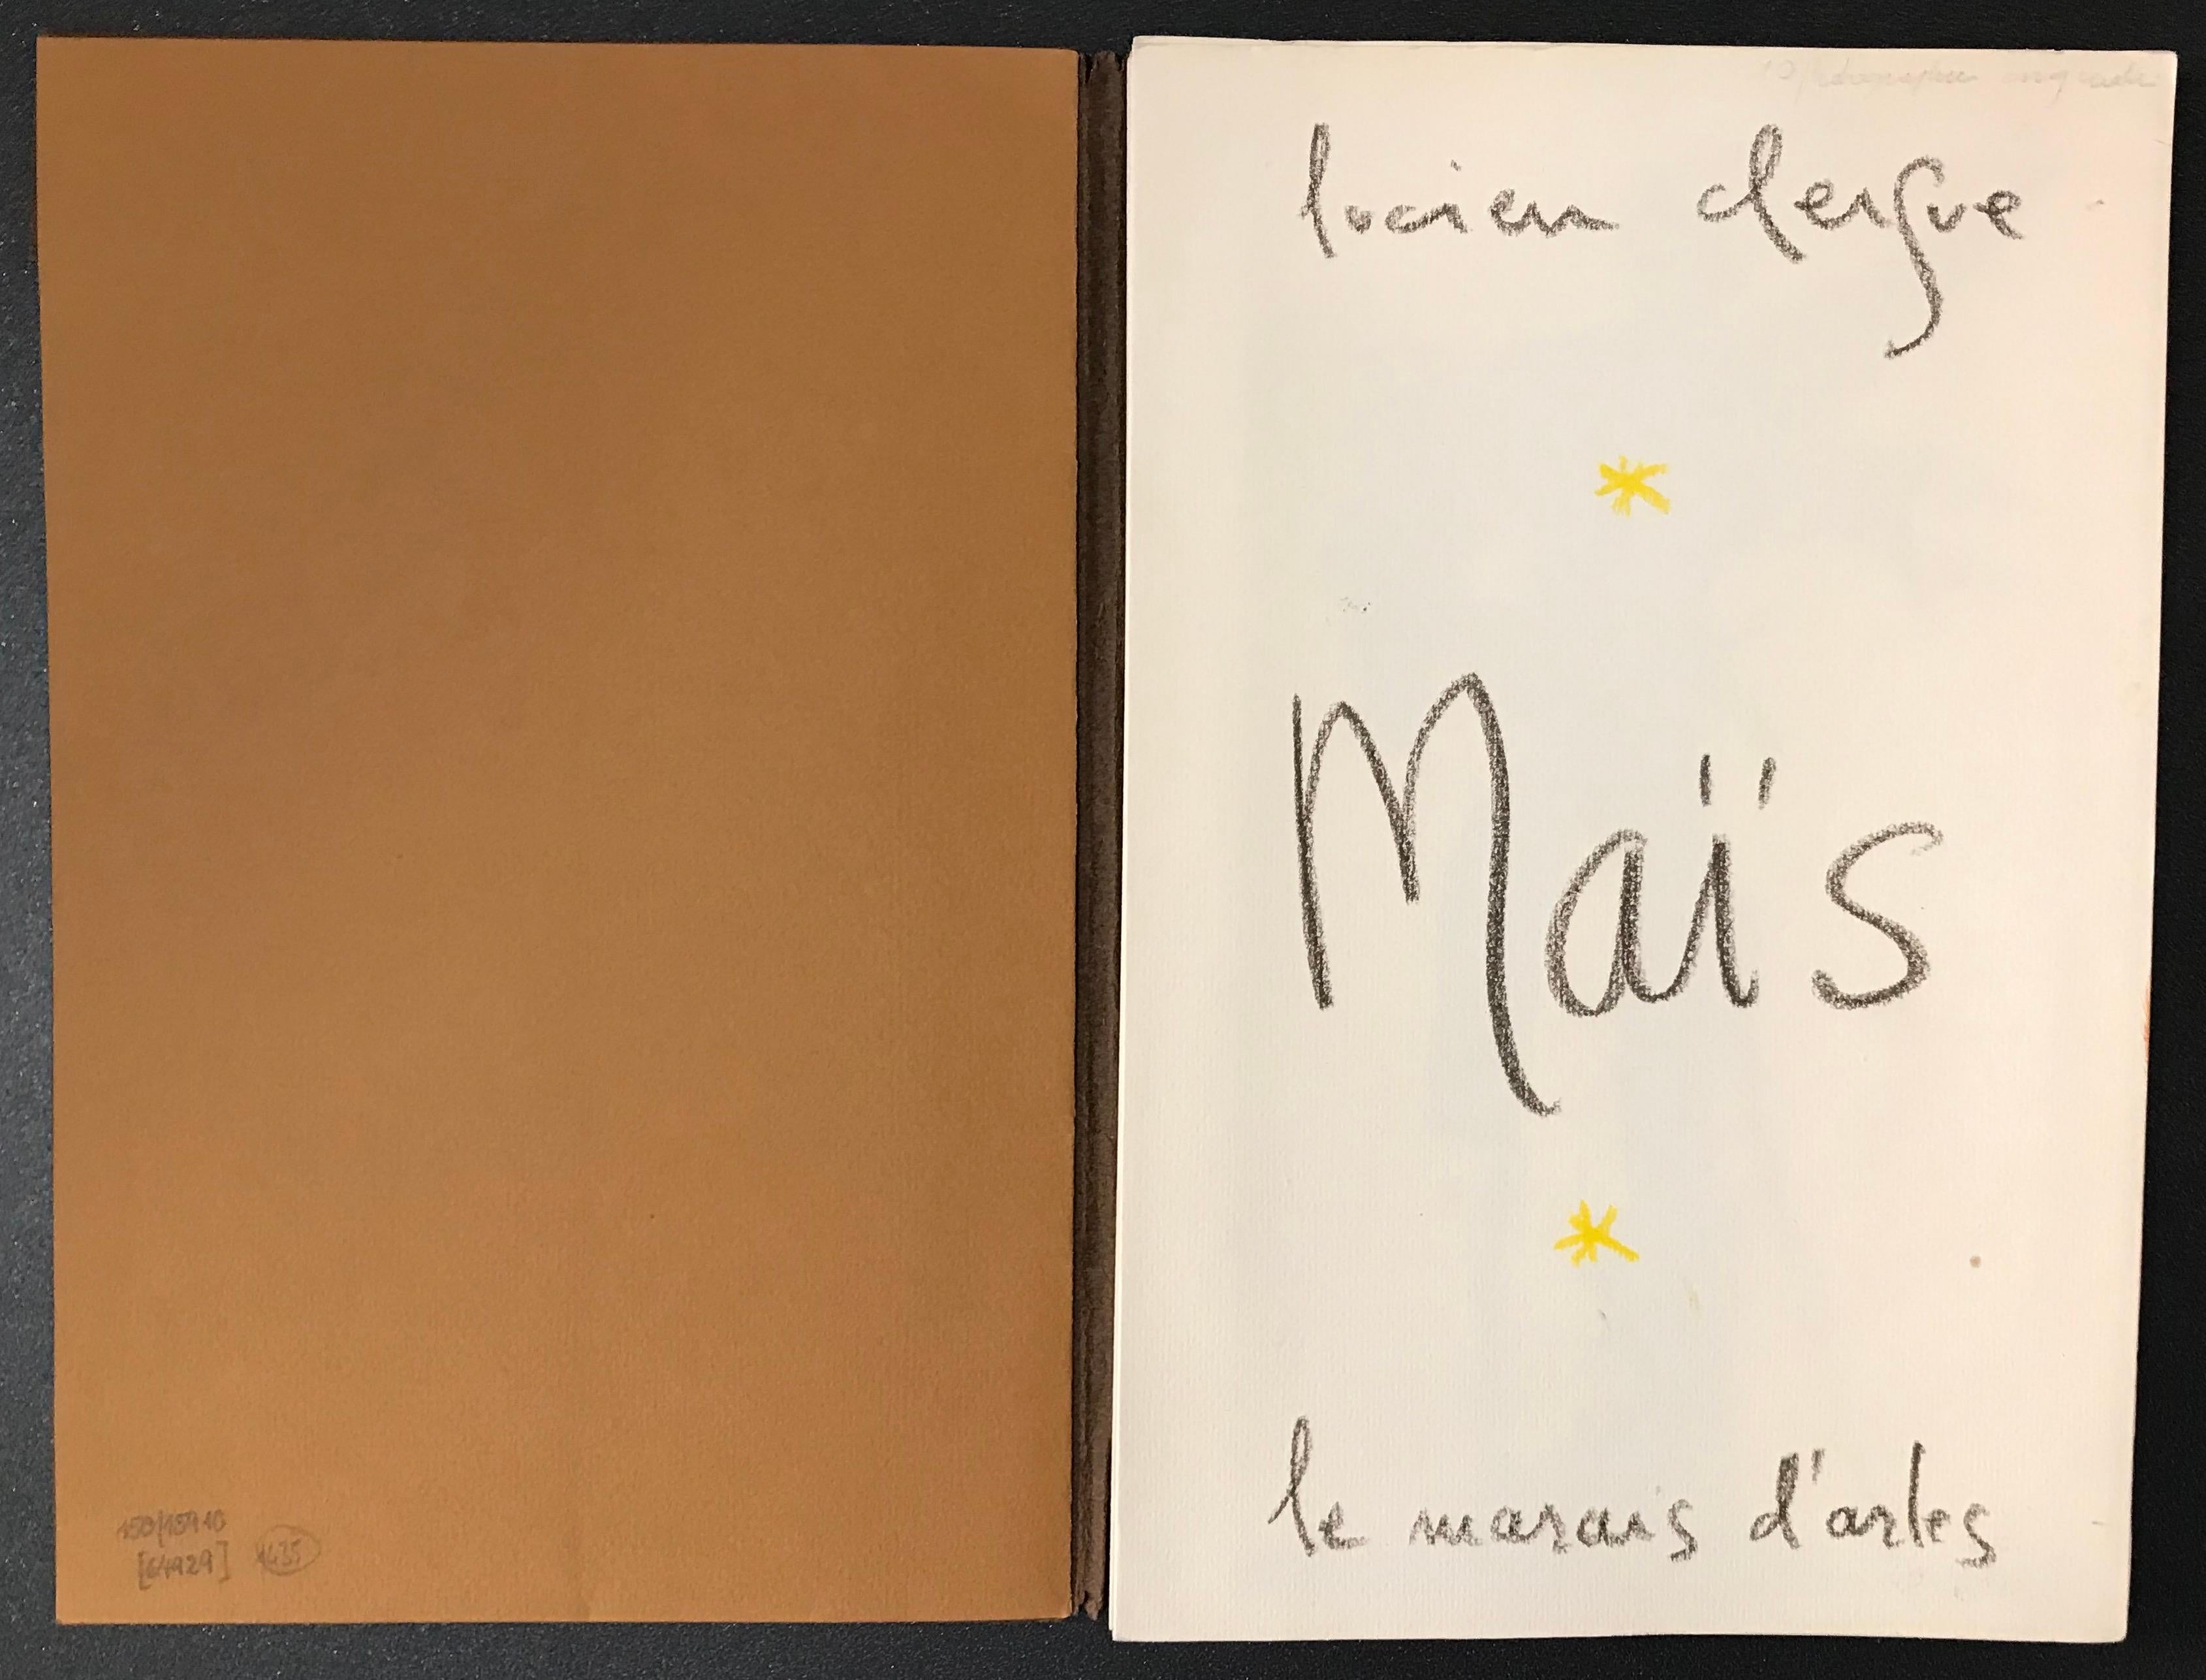 Maïs, Le Marais D'Arles is an original hand-made photographic book realized in 1960 by the famous photographer Lucien Clergue.

The artwork consists of an album of ten gelatin silver prints (about 18 x 13 cm each one) mounted at top corners